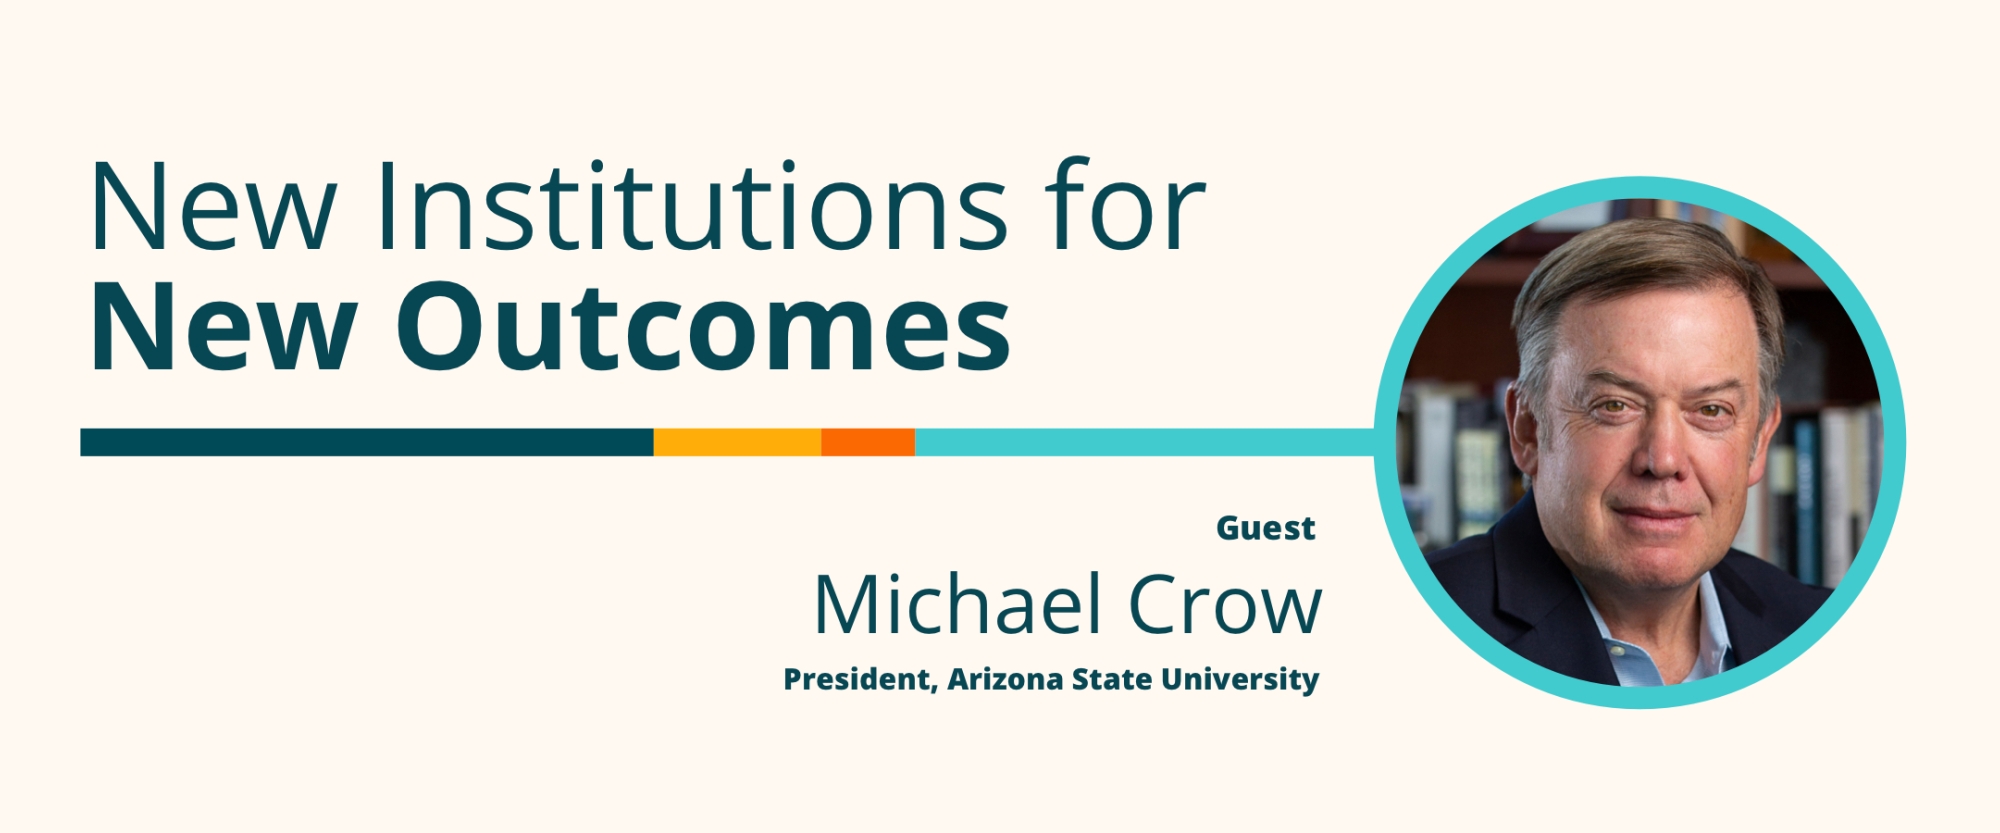 New Institutions for New Outcomes 